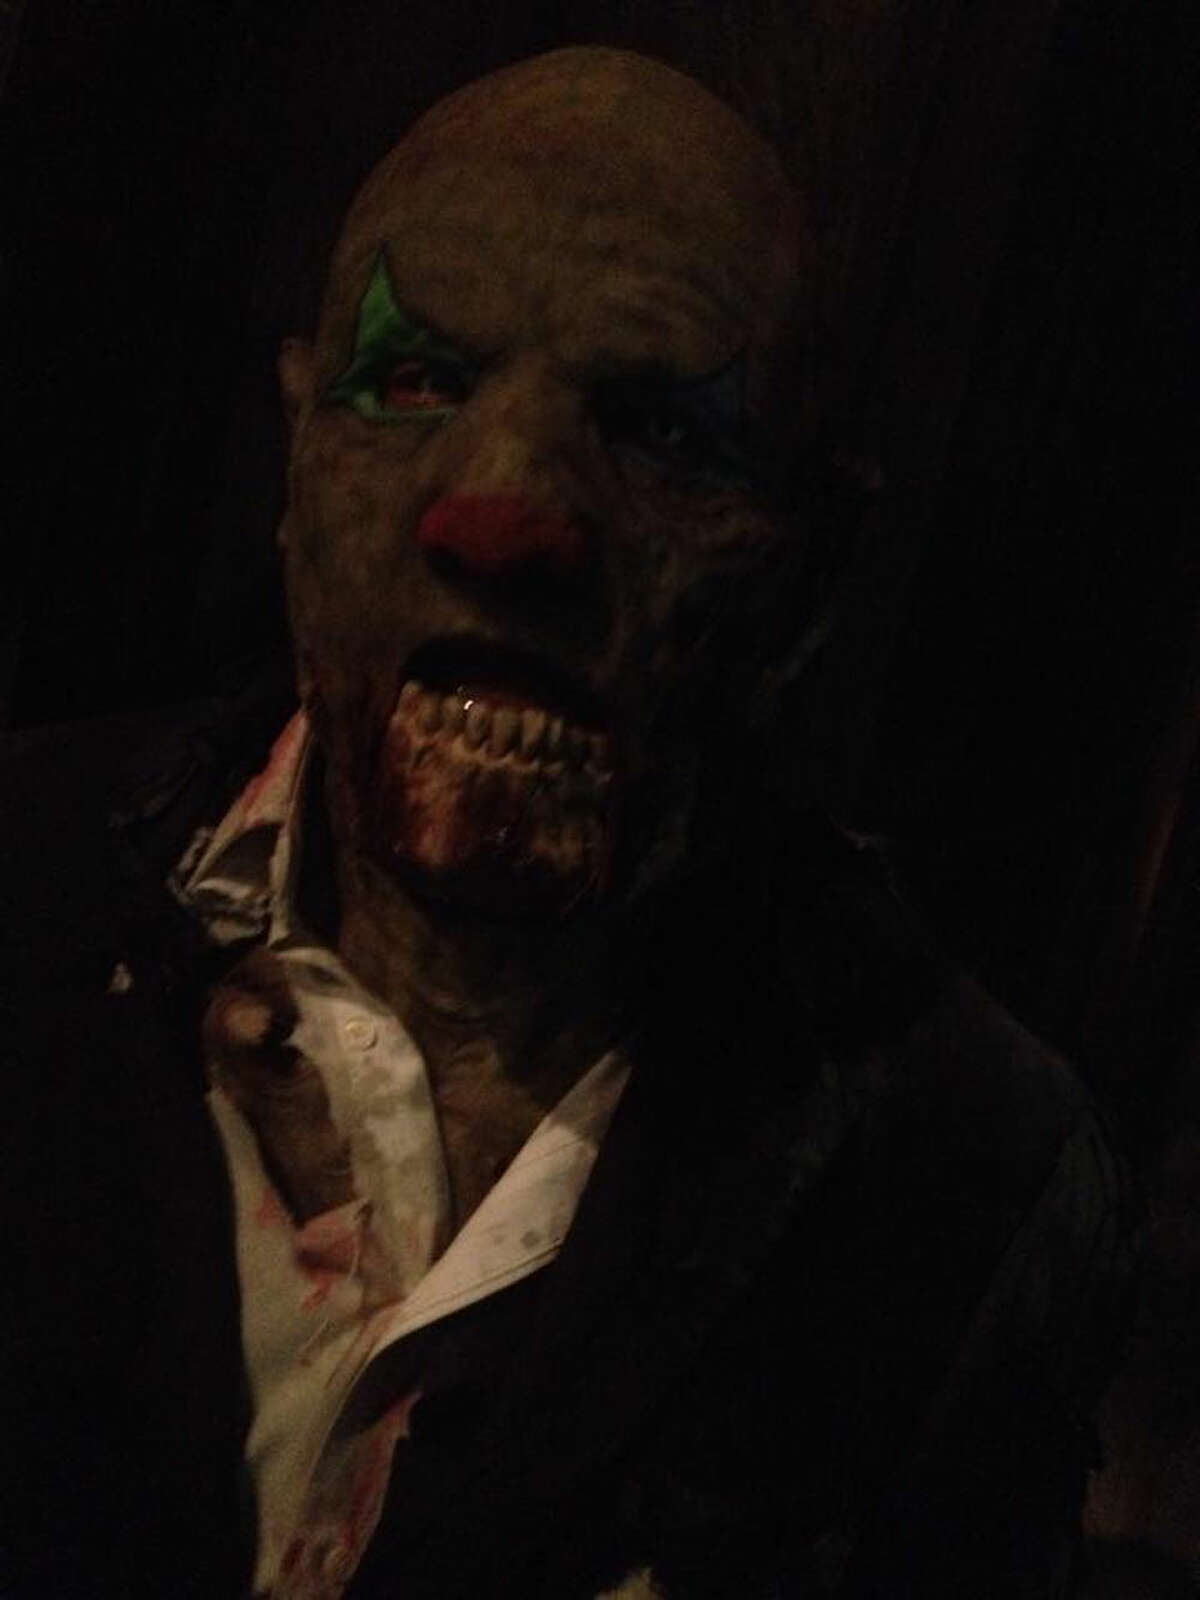 A zombie clown from The Blackness haunted house in Plainview